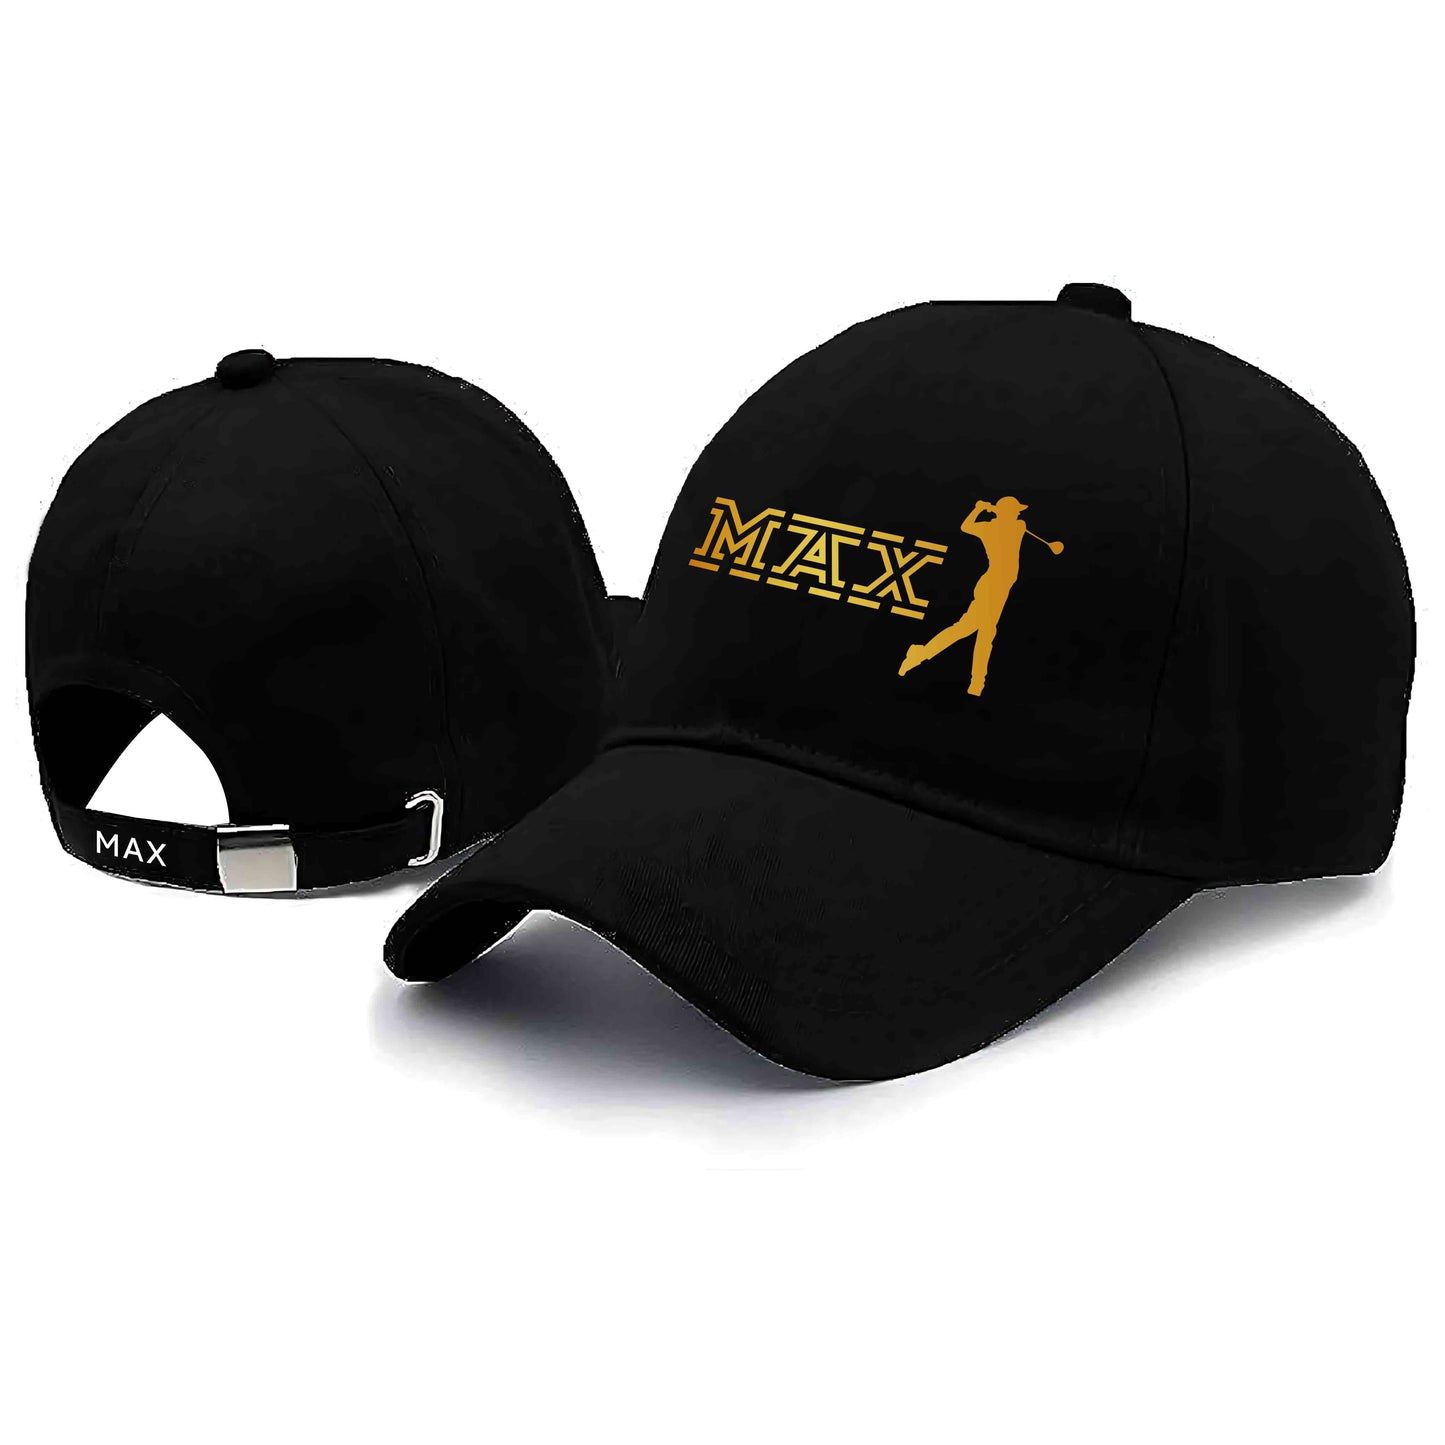 Nutcase Black Color Cap - Personalized with Name Black Caps - Golf